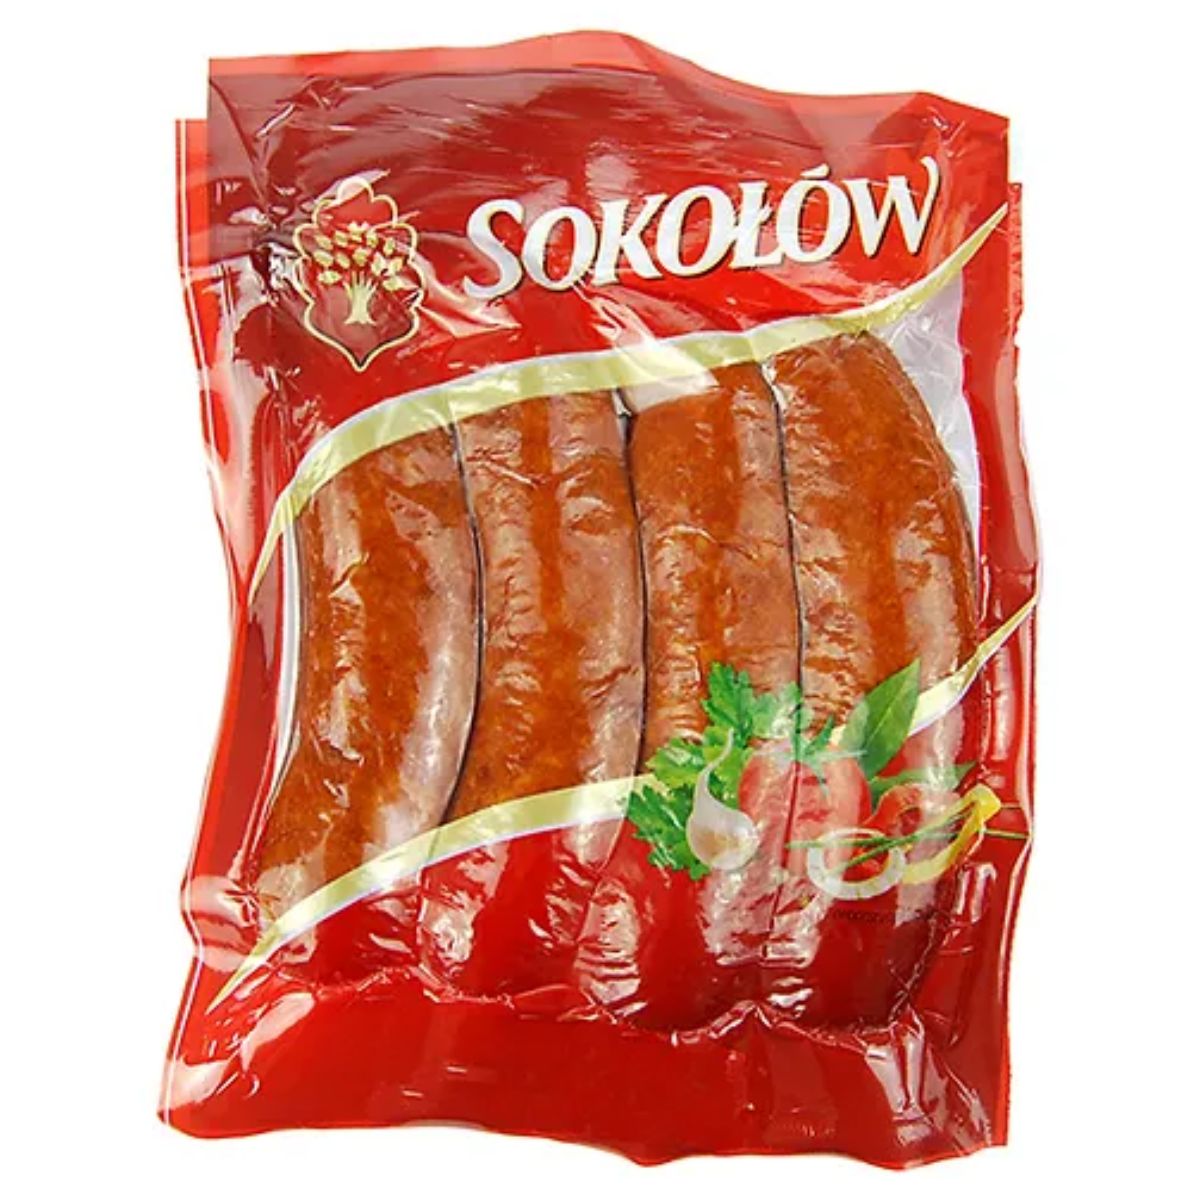 A package of Sokolow - Polish Grill Sausage - 427g (Varies) on a white background.